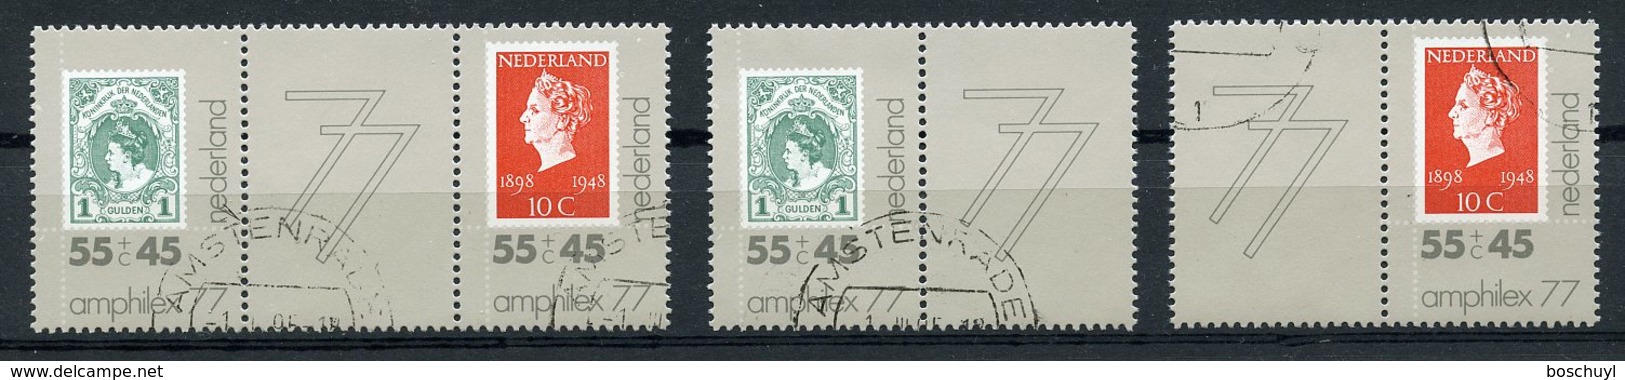 Netherlands, 1977, Amphilex Stamp Exhibition, Combinations From Sheet, Used, Michel 1101, 1104 - Oblitérés